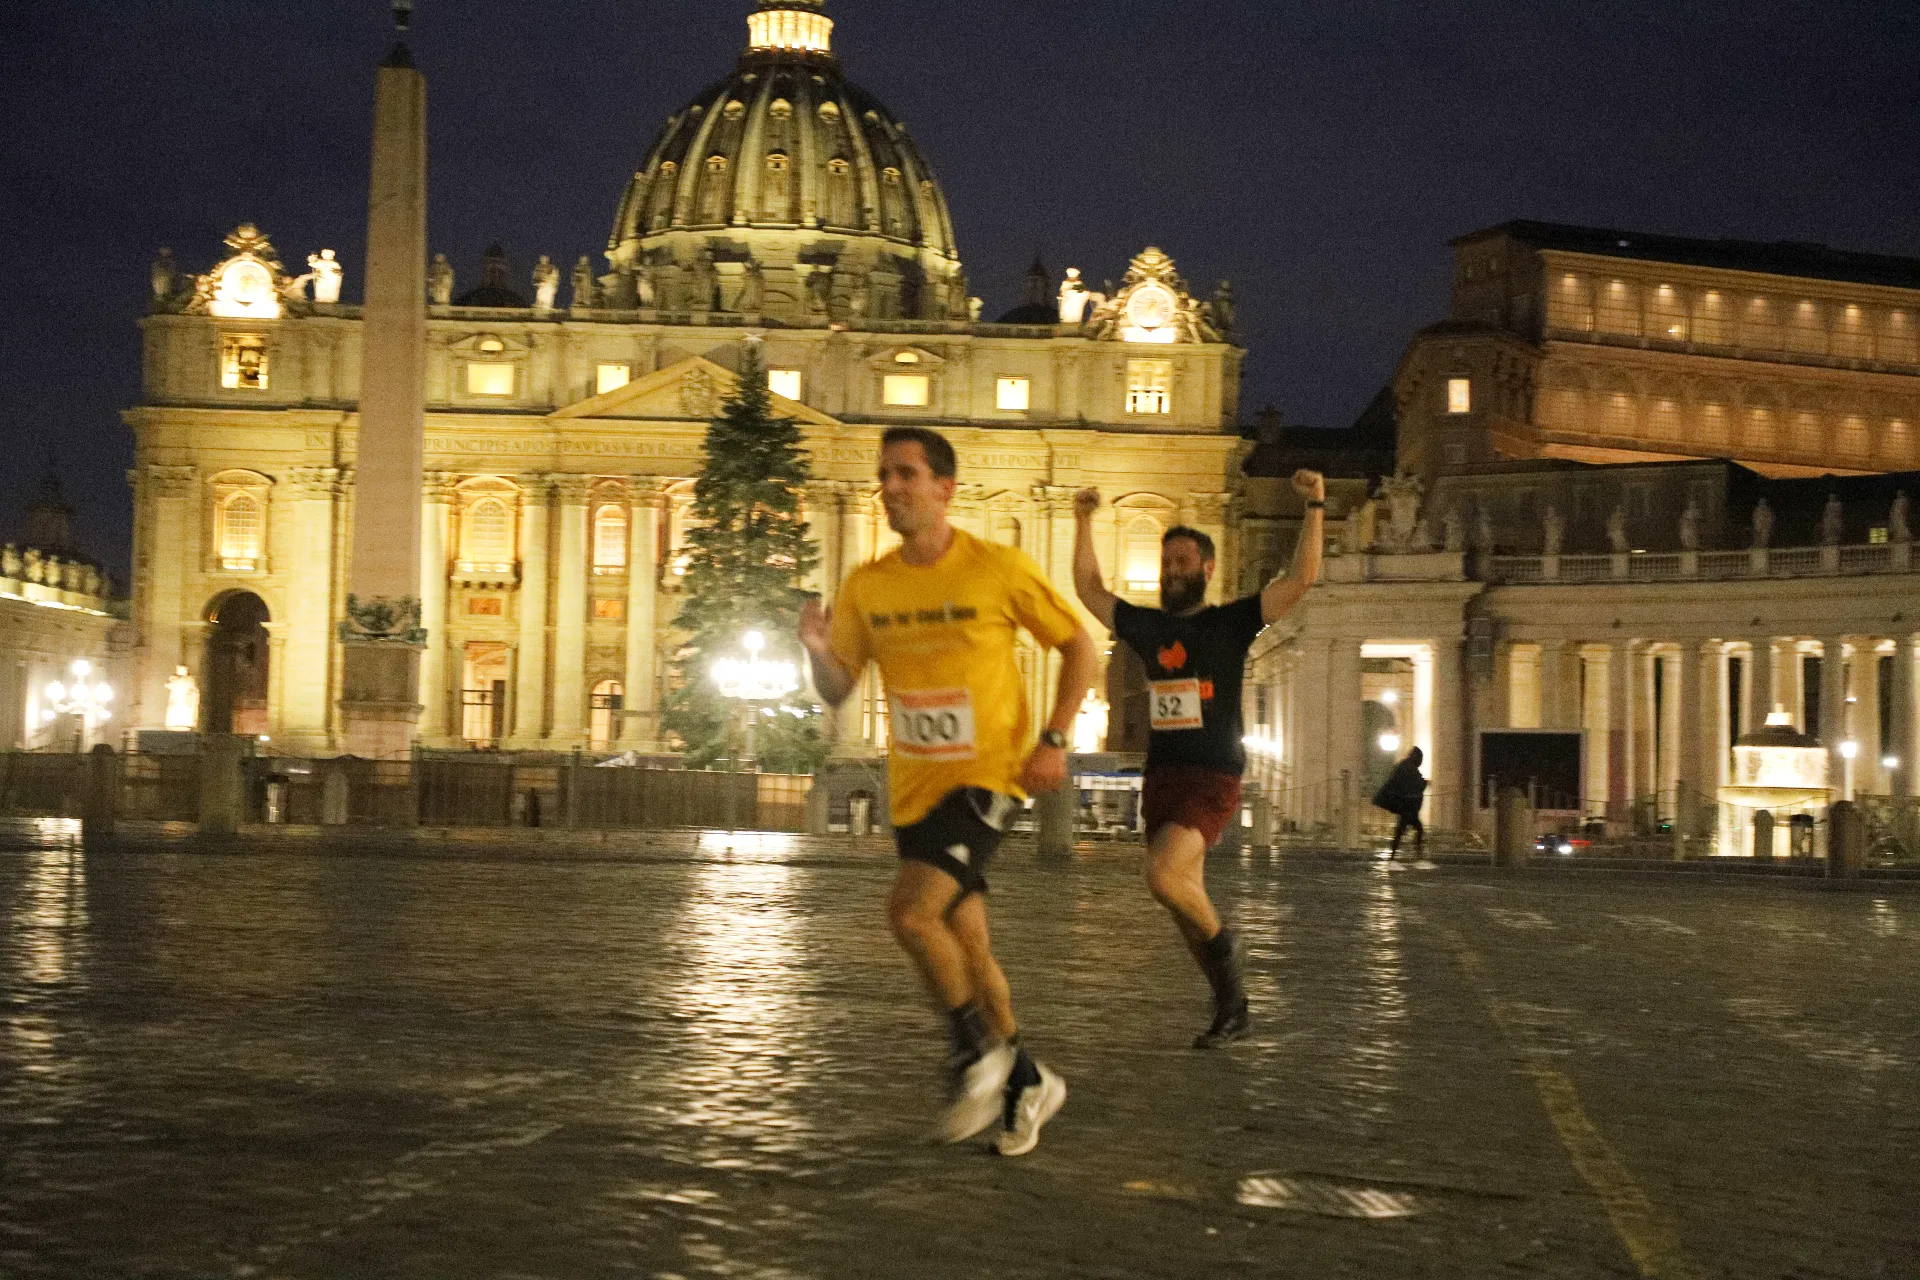 Runners in the 13th Annual Thanksgiving Turkey Trot around Vatican City on Nov. 24, 2022.?w=200&h=150